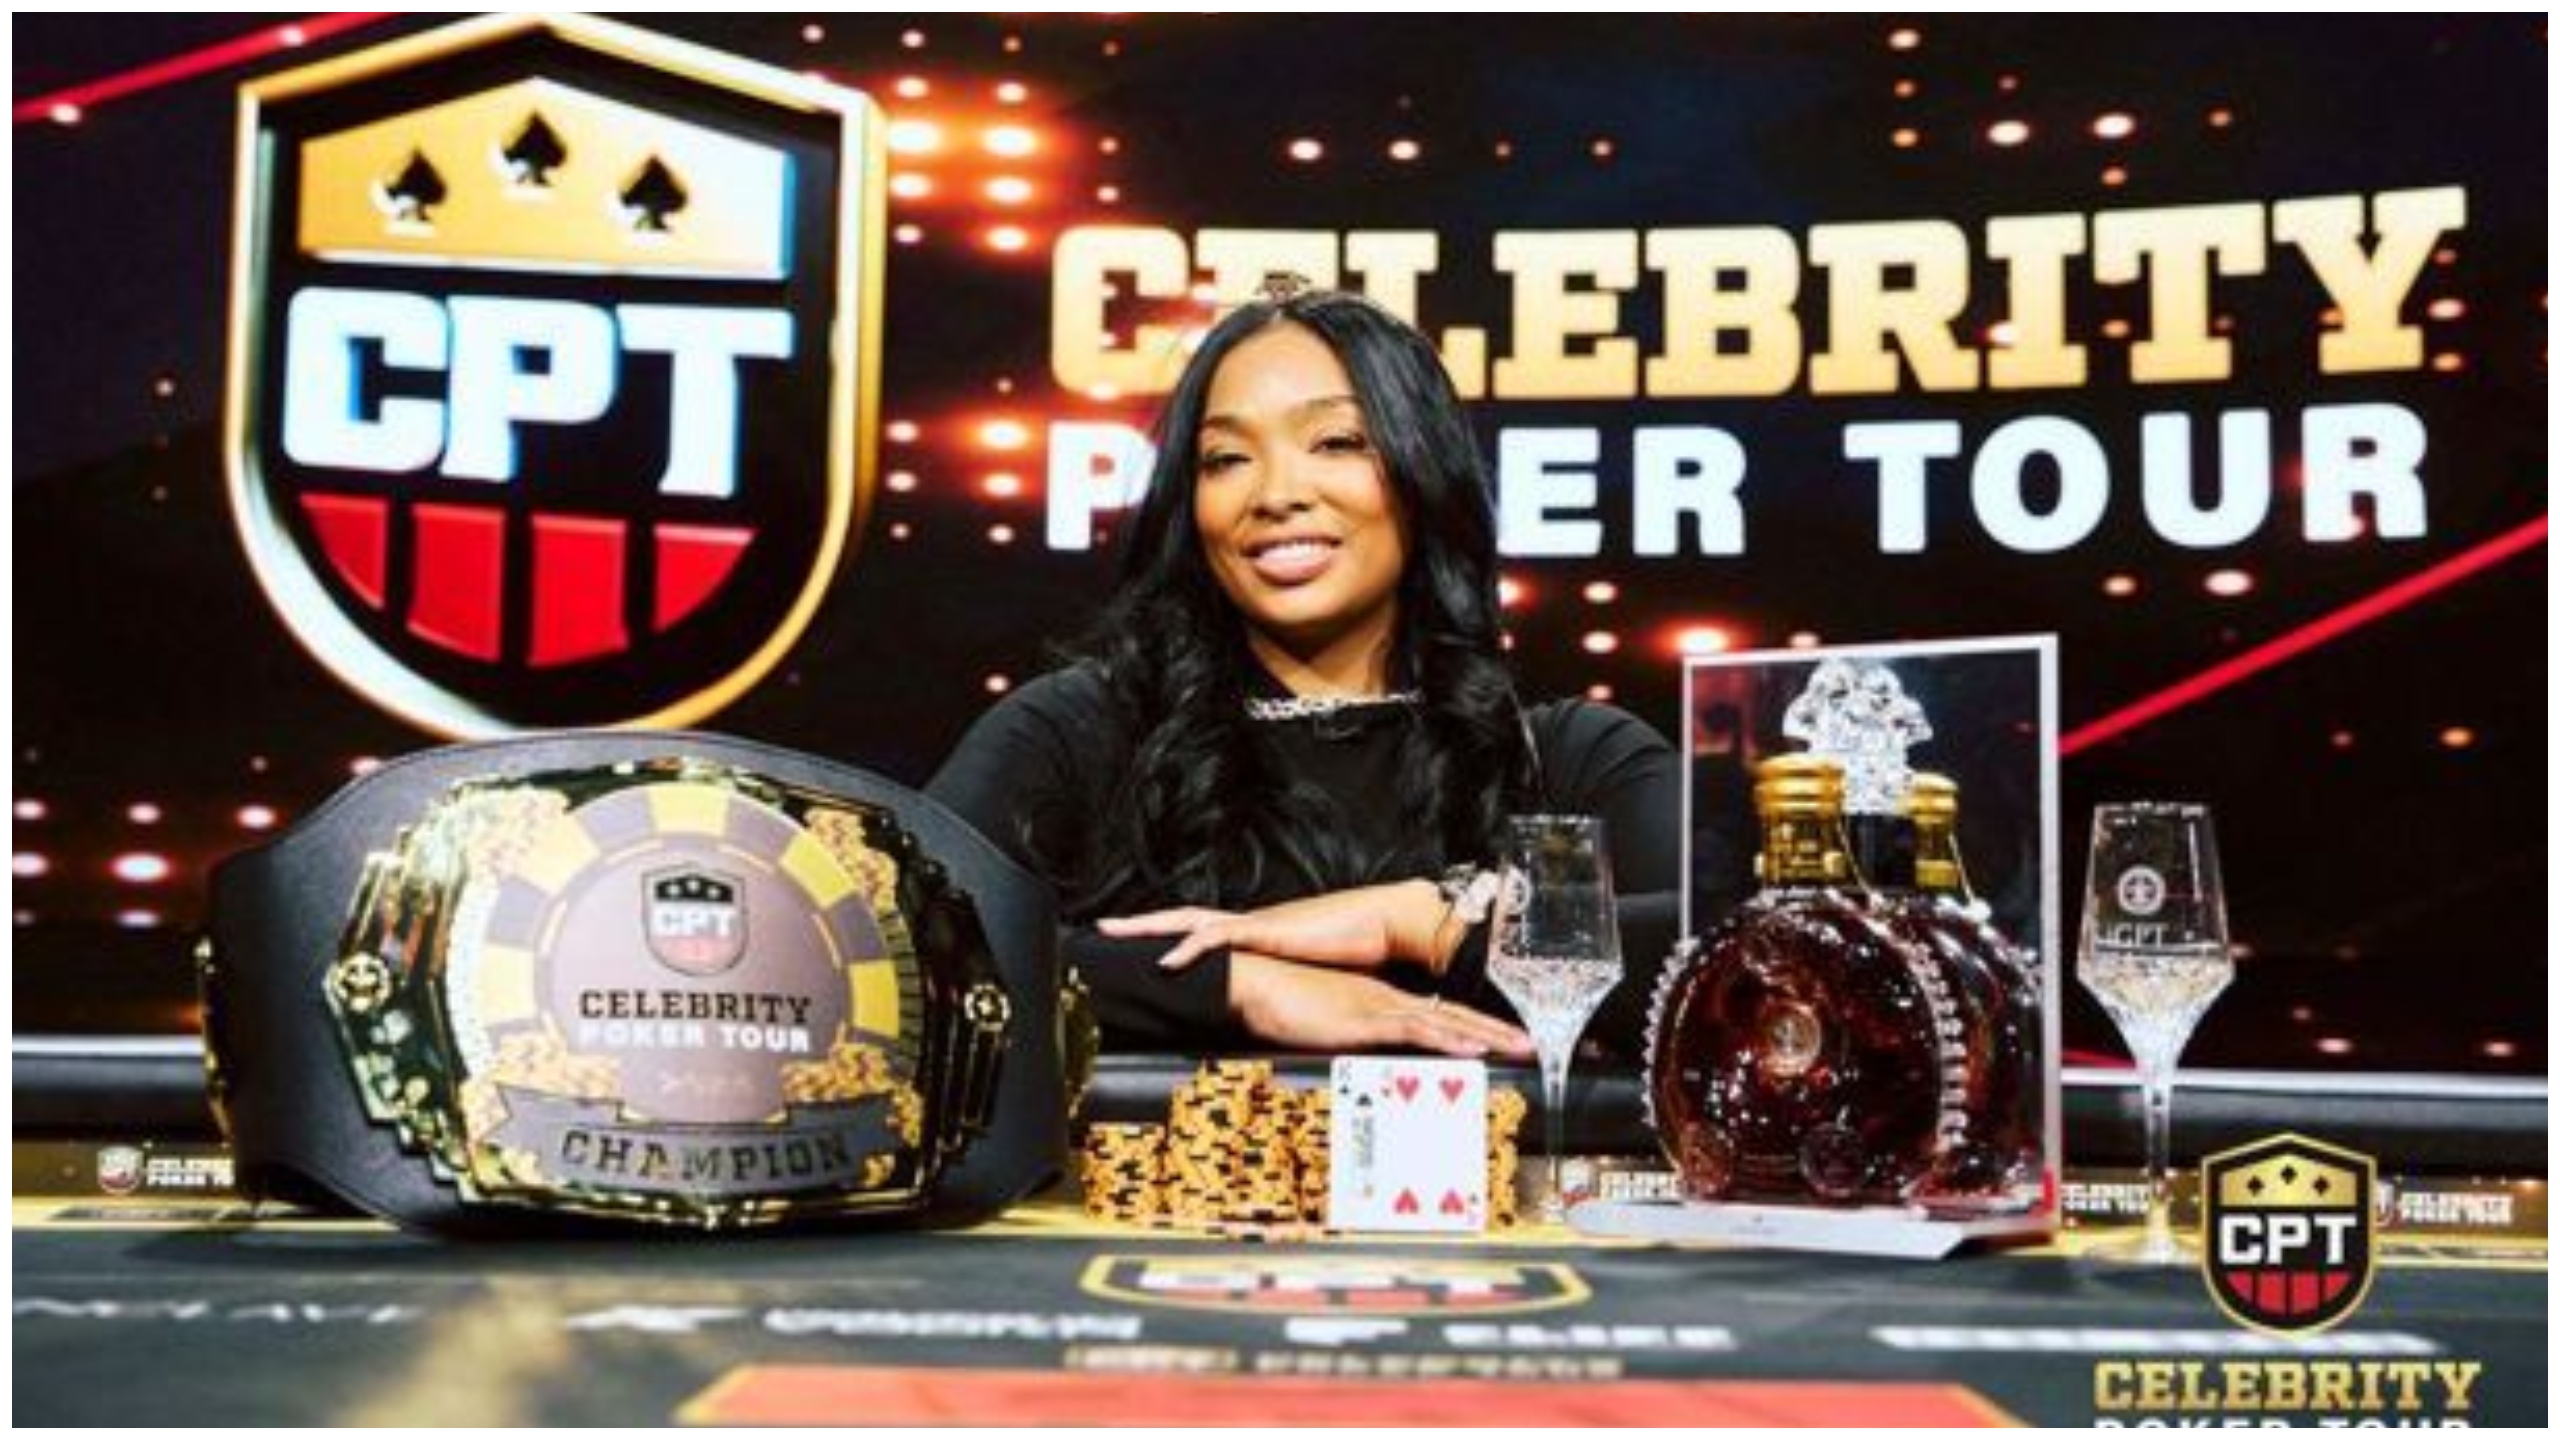 Princess Love Makes History as First Black Woman to Triumph in Celebrity Poker Tournament